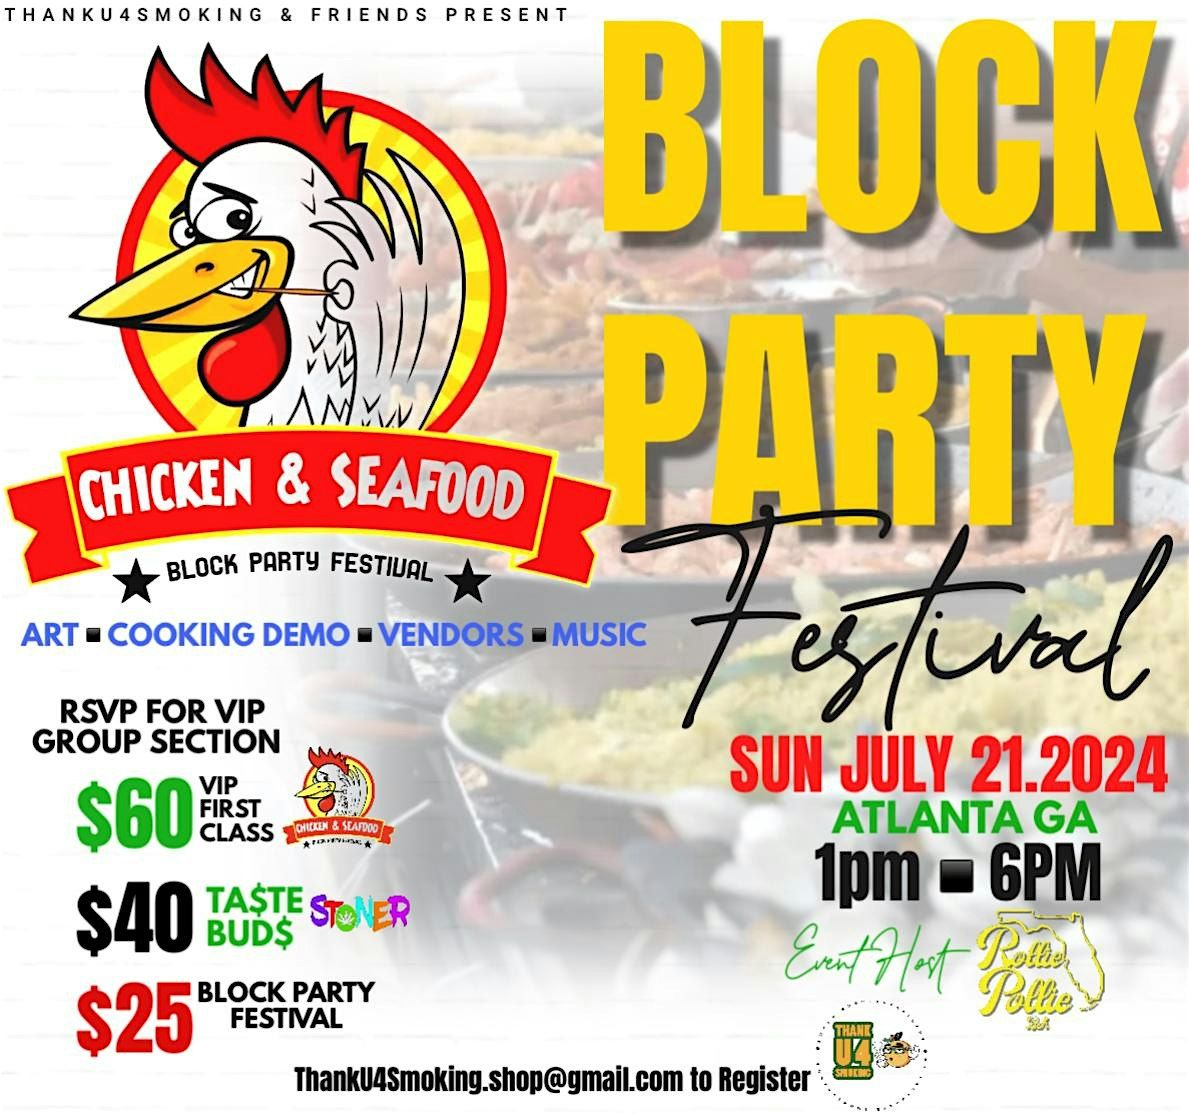 Chicken and Seafood \u201c Block Party\u201d Festival